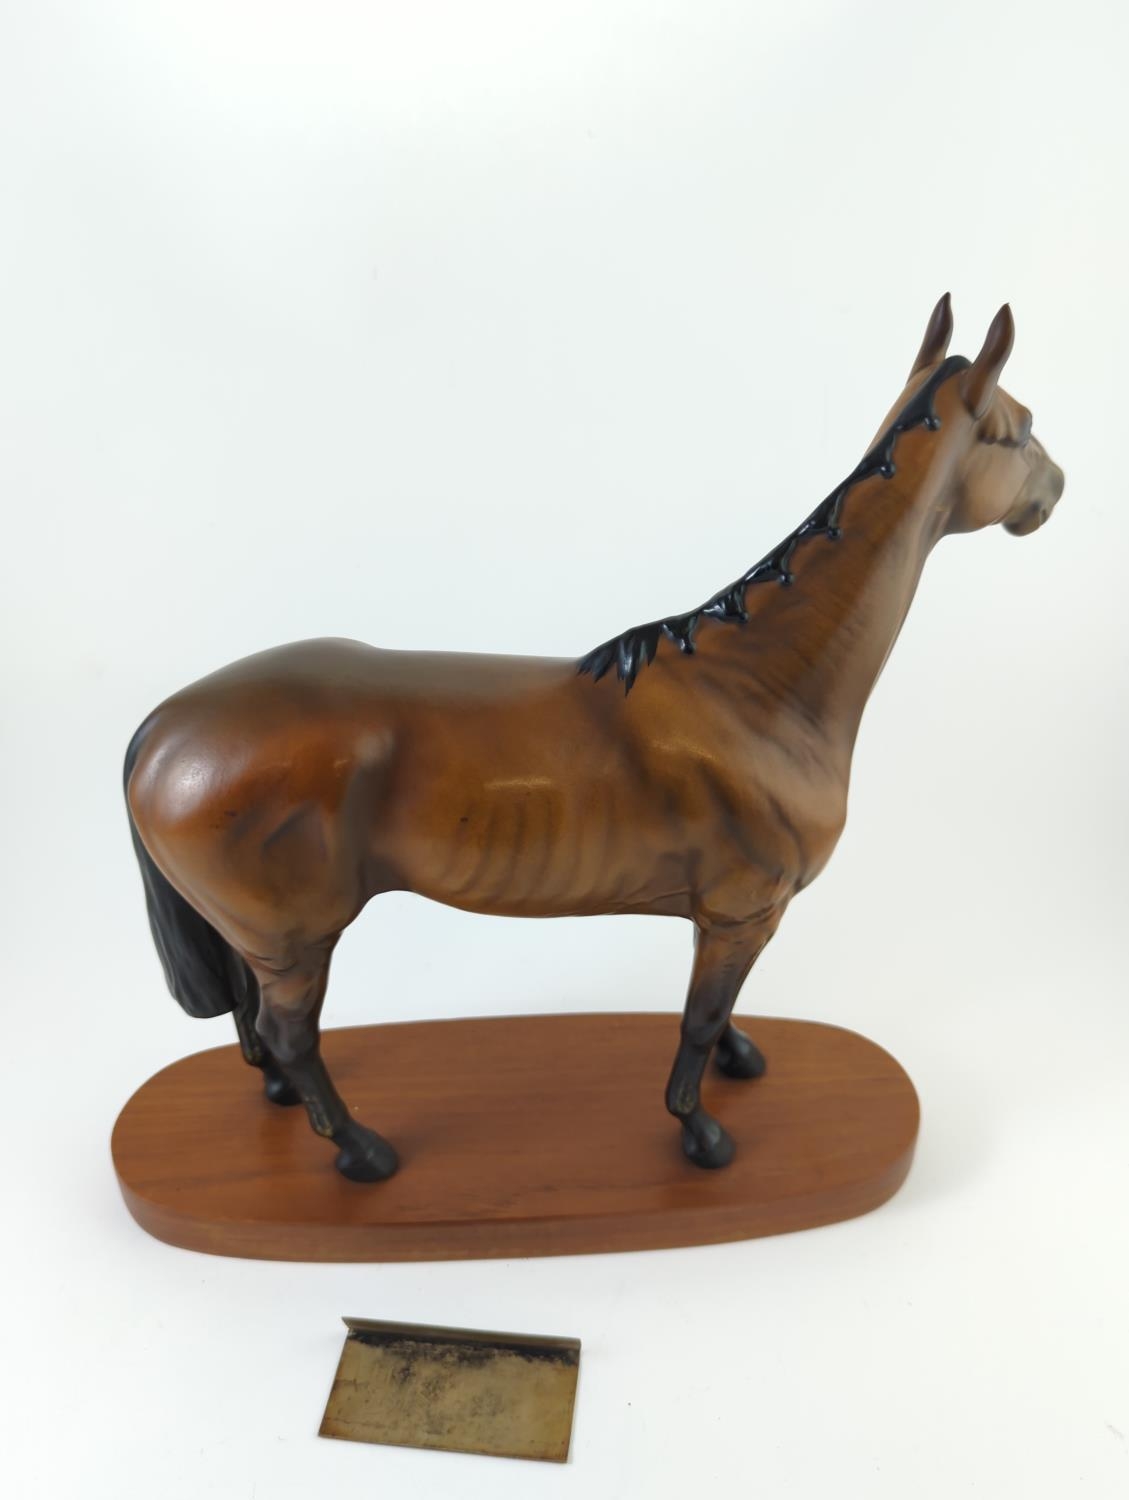 Beswick 'Arkle' racehorse with plaque, L32 x H31cm  - Image 2 of 2